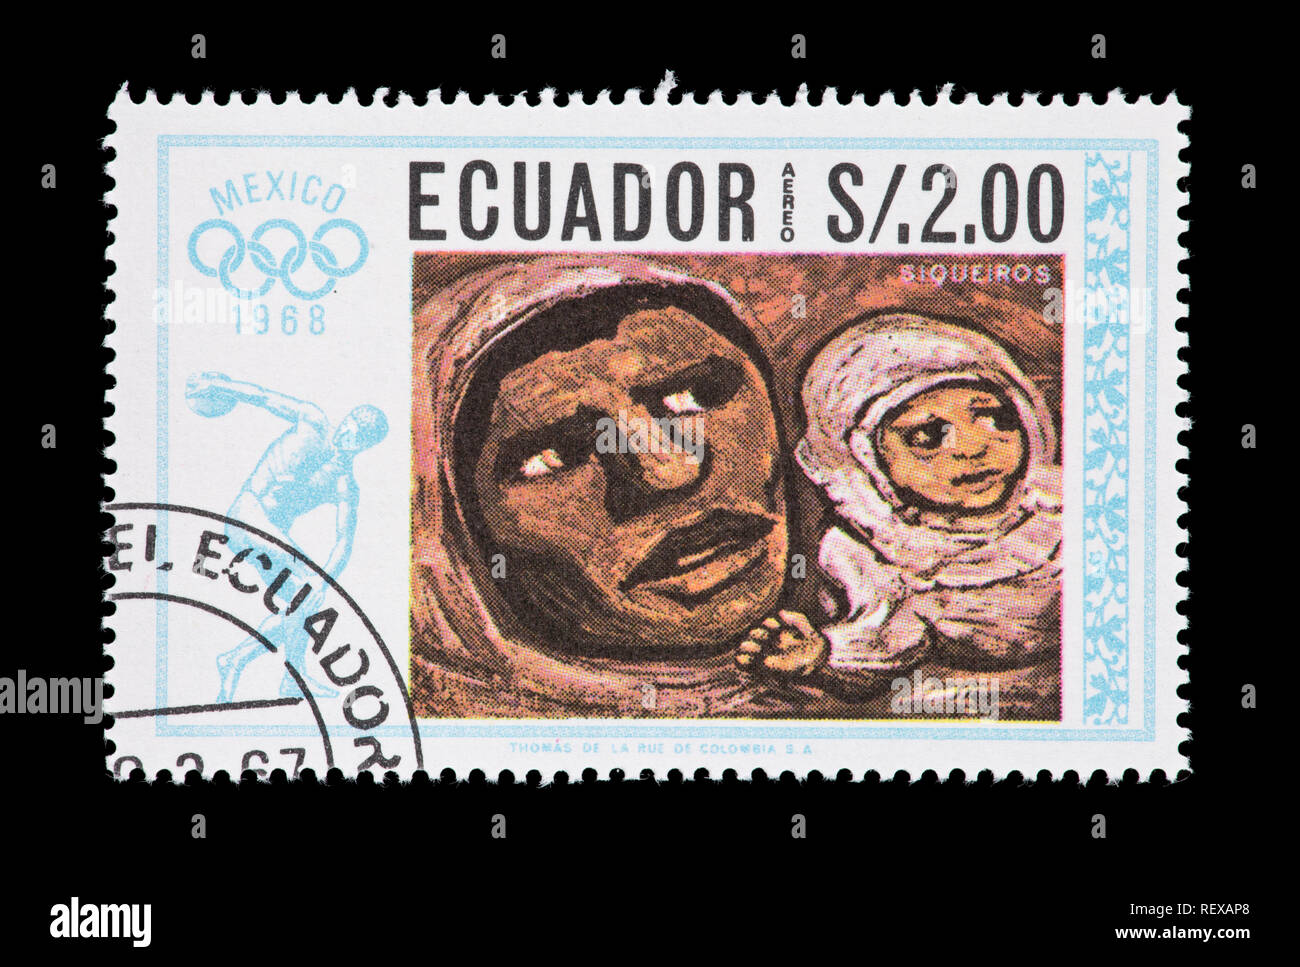 Postage stamp from Ecuador depicting native art (David Siqueiros painting Mother and Child) for the 1968 Mexico City Olympics Stock Photo